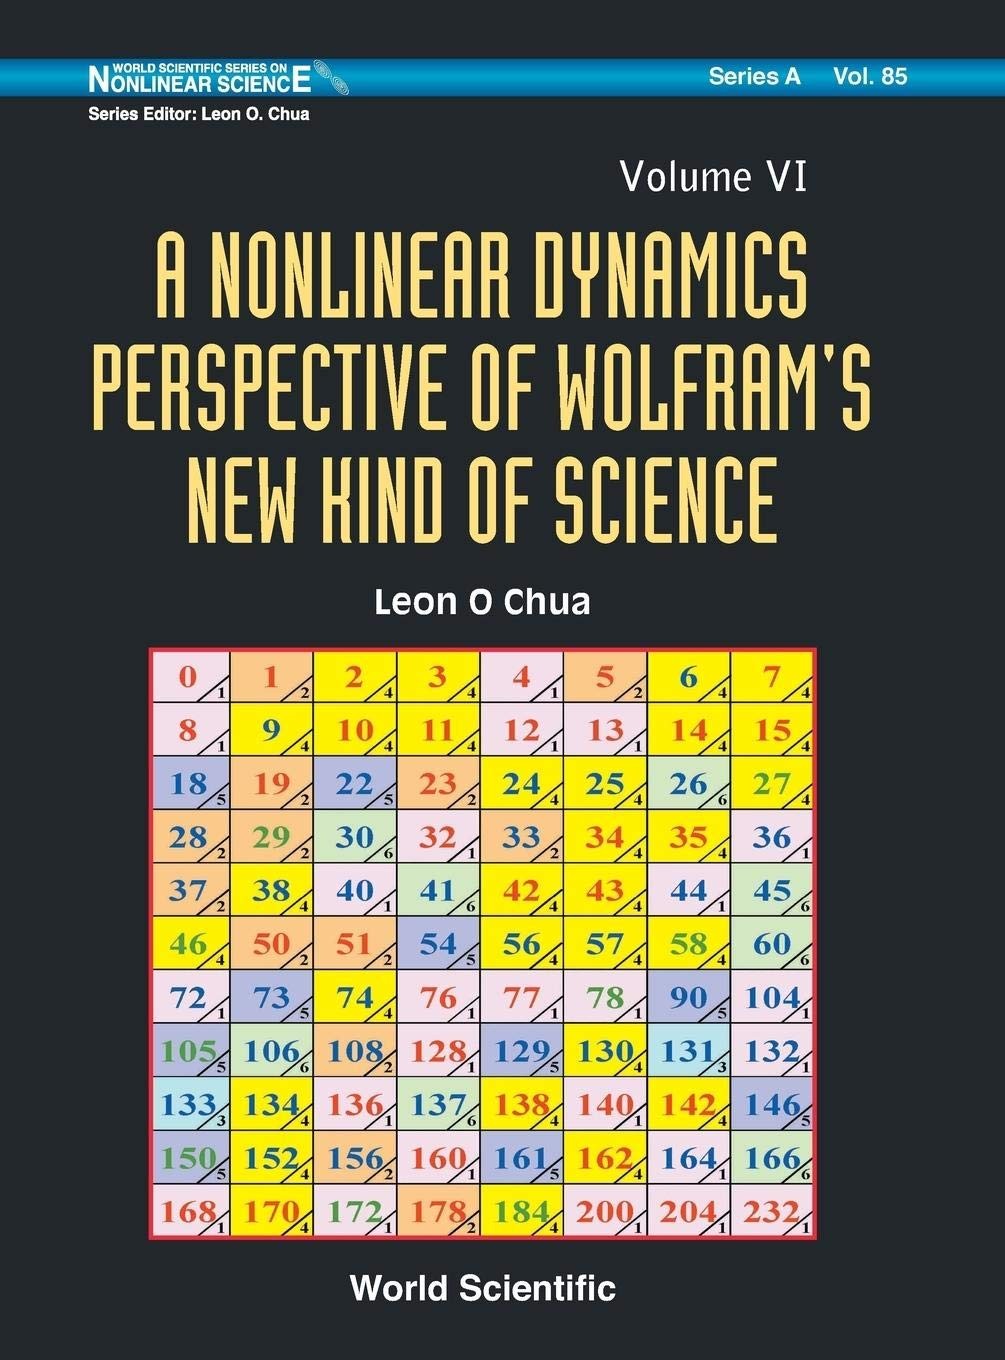 A Nonlinear Dynamics Perspective of Wolfram's New Kind of Science - Volume 6